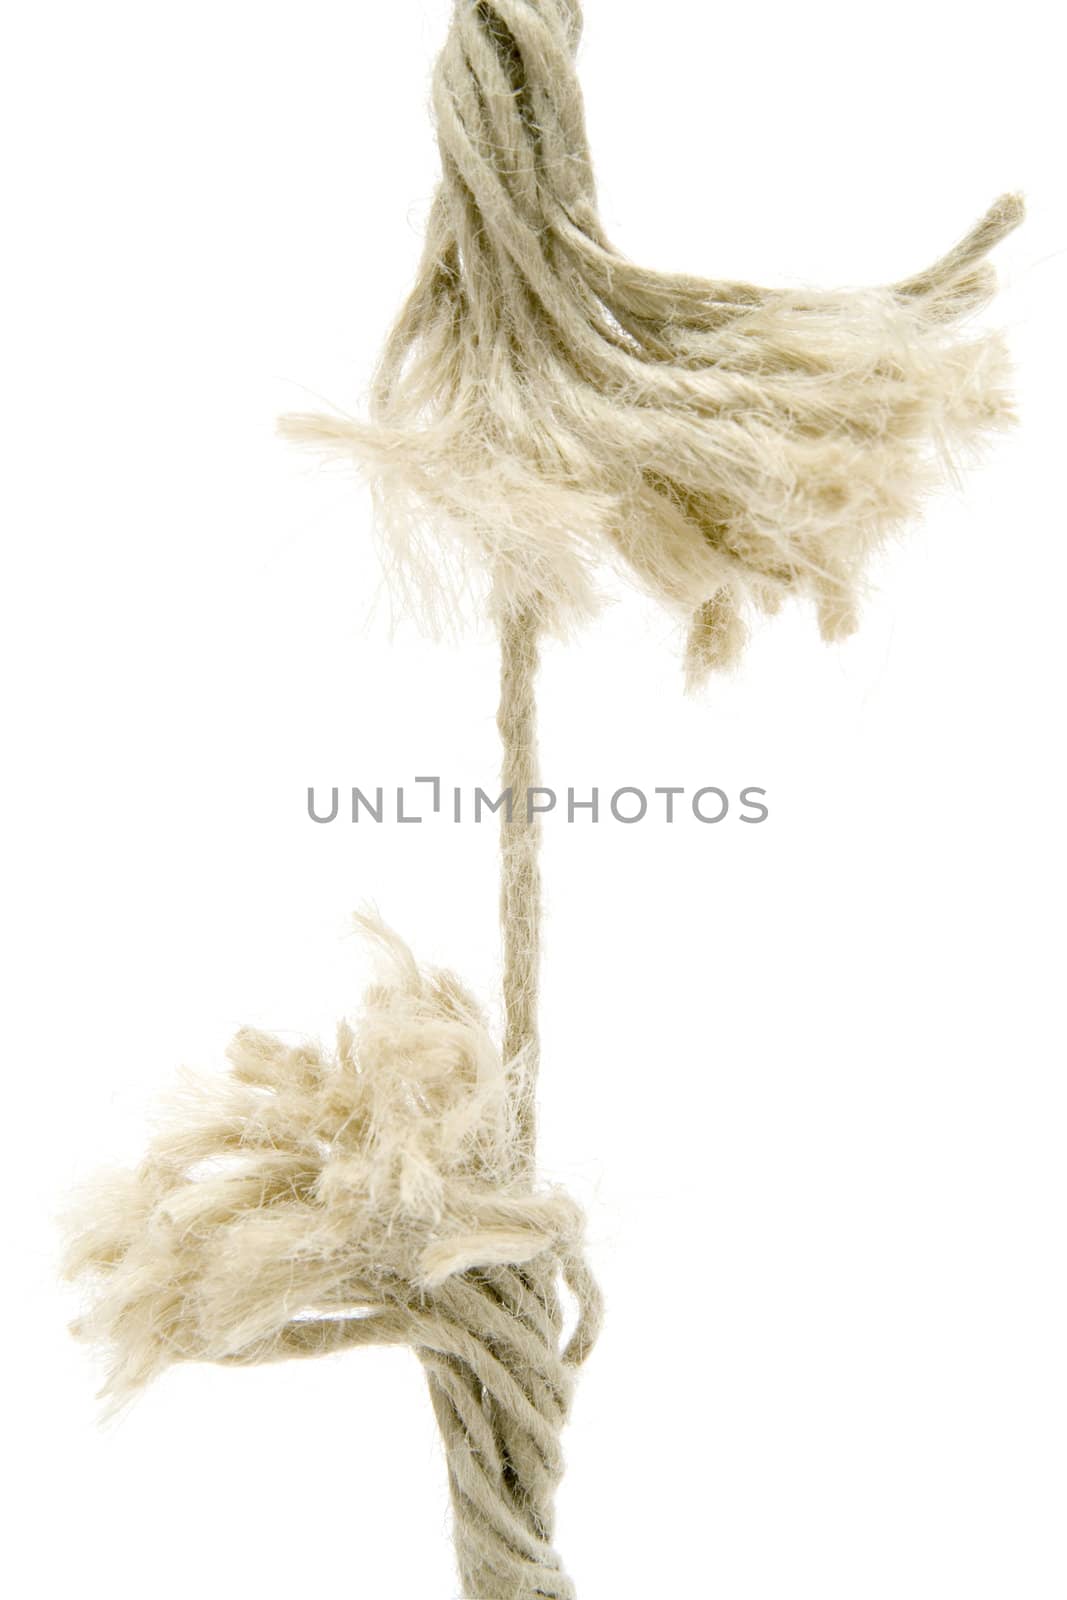 Breaking rope isolated on a white background.